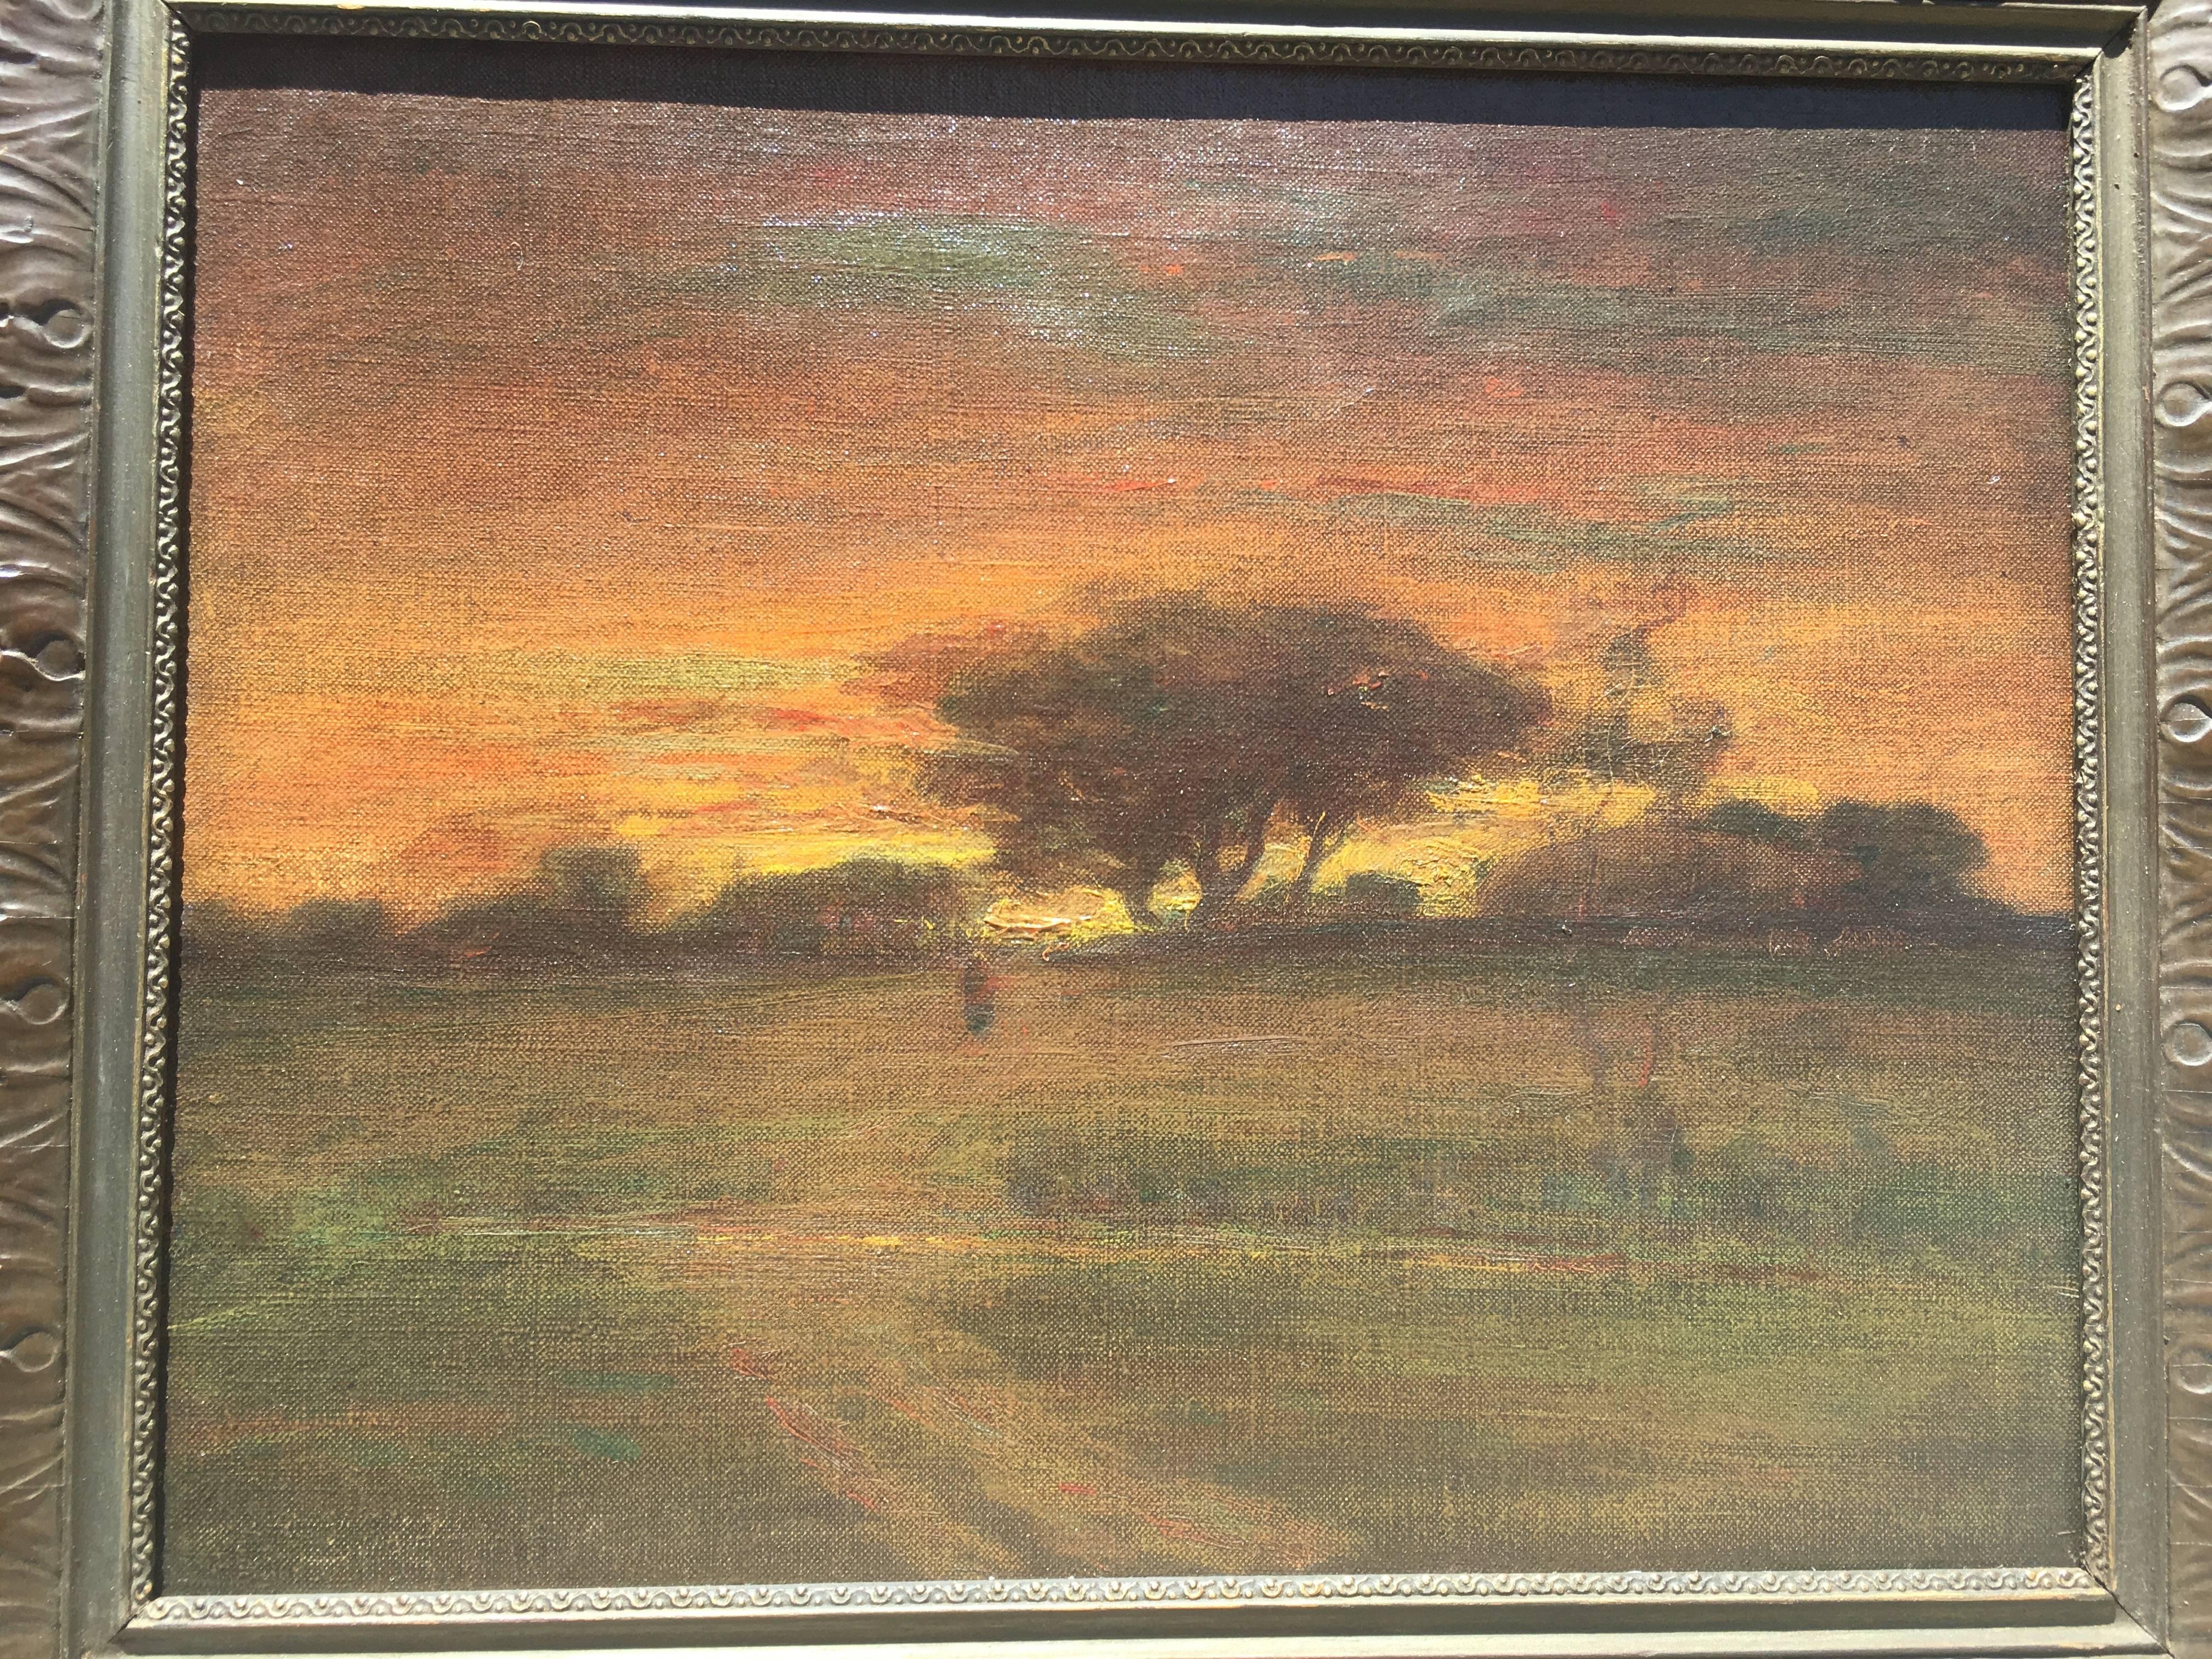 In the style of George Inness Landscape Painting - Sunset with Figure Walking into Village with Stream in the foreground